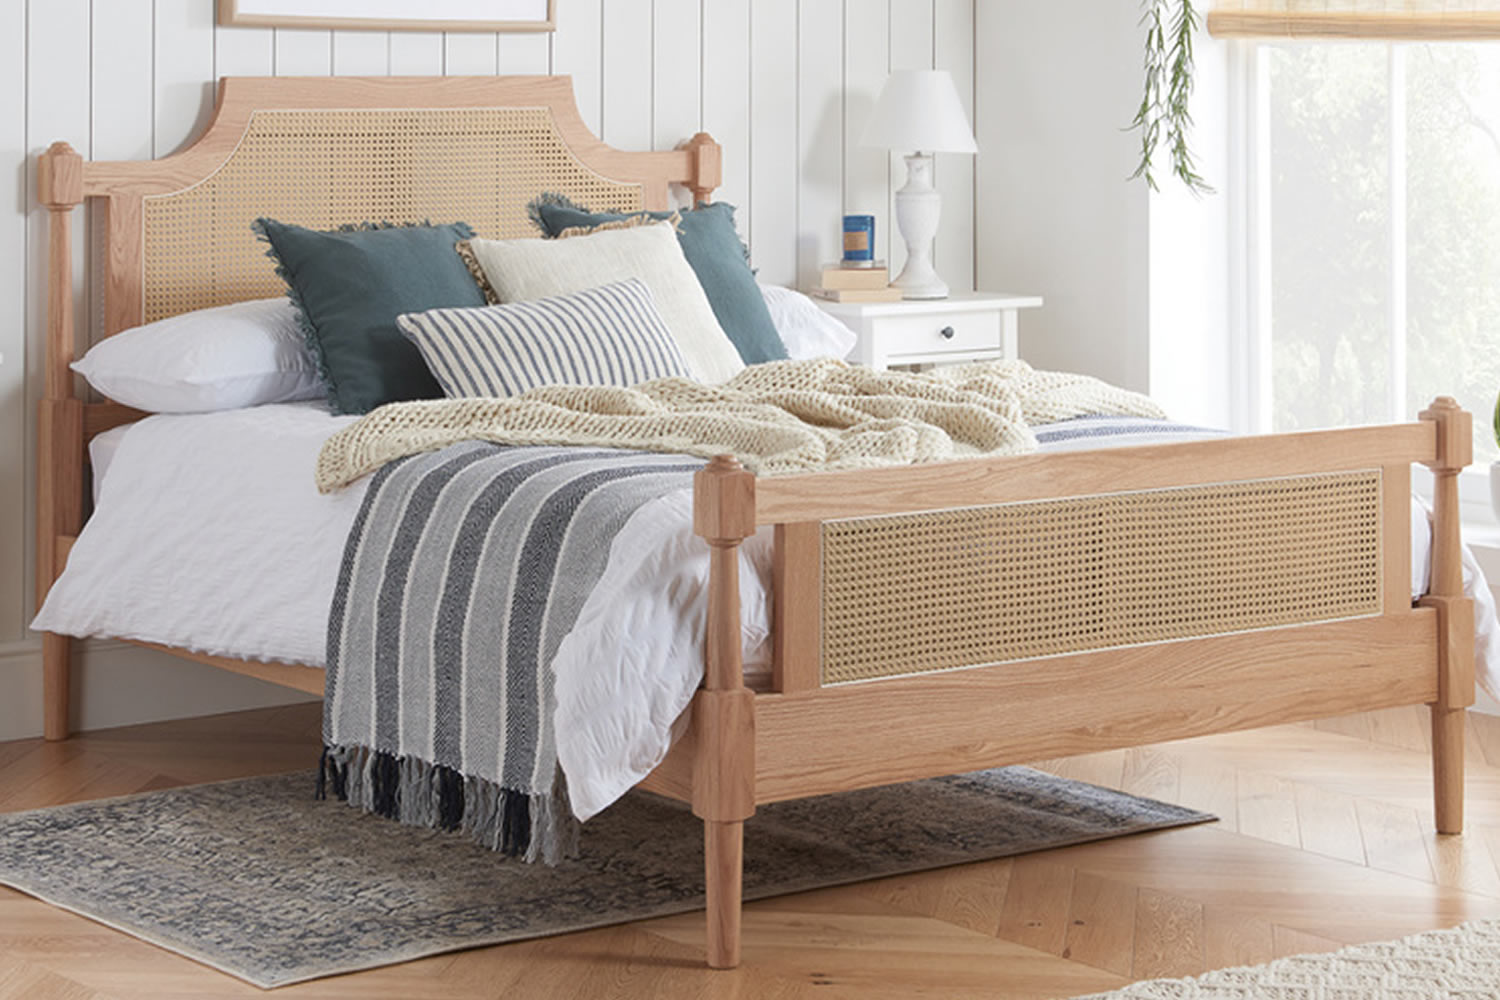 View Geneva Wooden Rattan 50 King Size Bed Frame Crafted From Solid Oak Rattan Headboard Foot End Sturdy Legs Sprung Slatted Base information